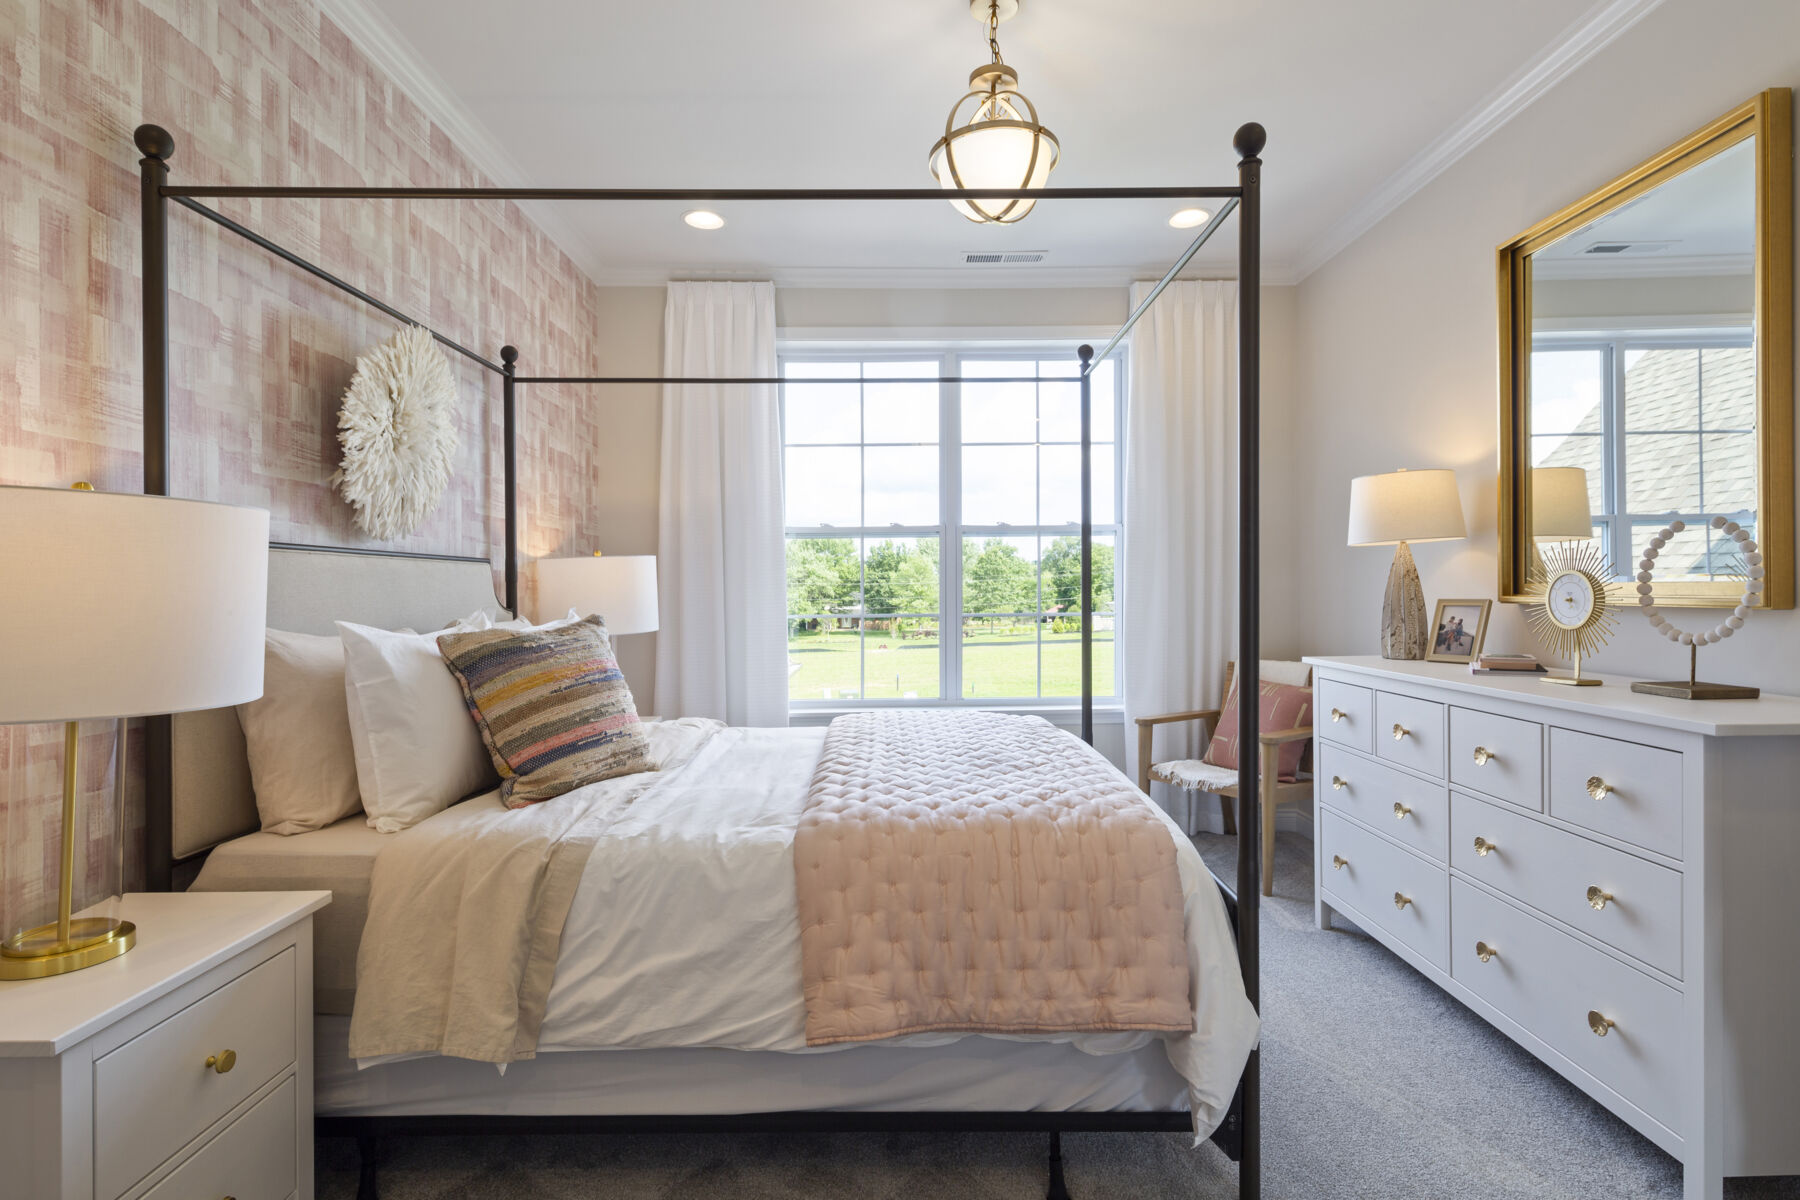 Bedroom Style Quiz | Welcome to Better - M/I Homes